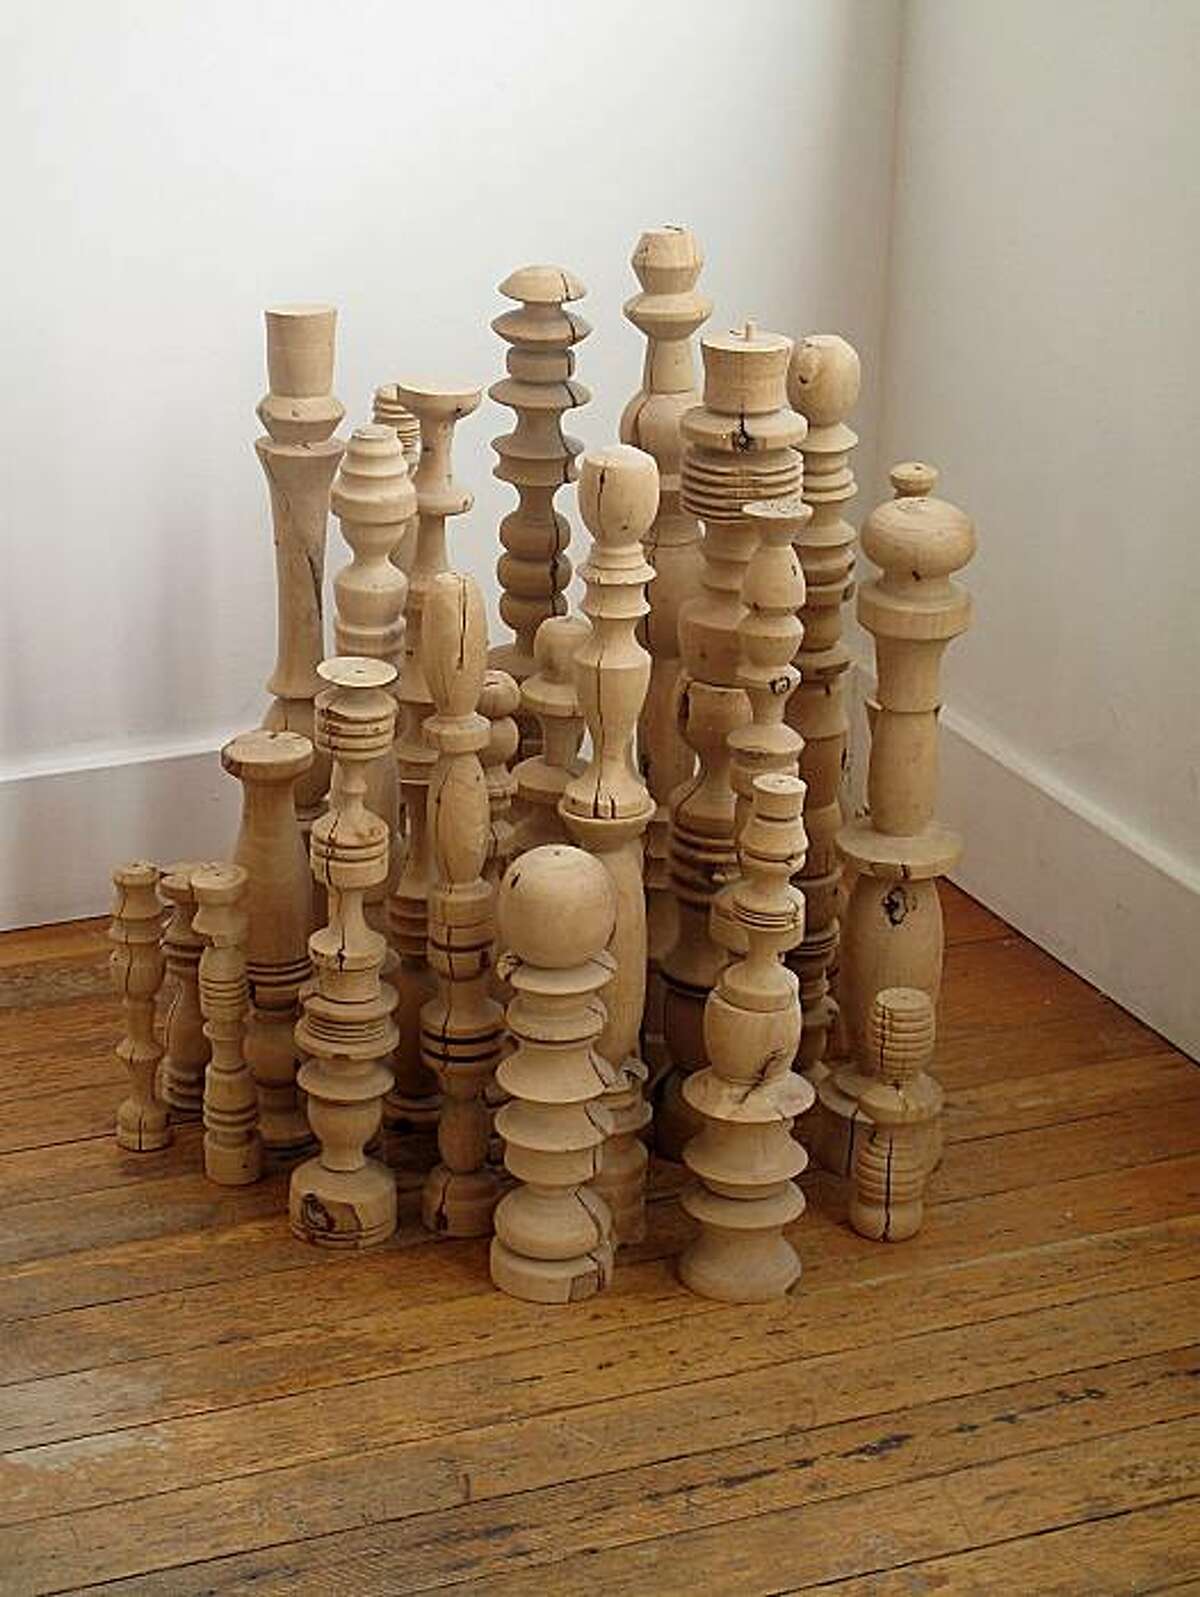 "Remnant of the Excavation Project" (2005) lathe-turned wood by Randy Colosky 81" x 77"